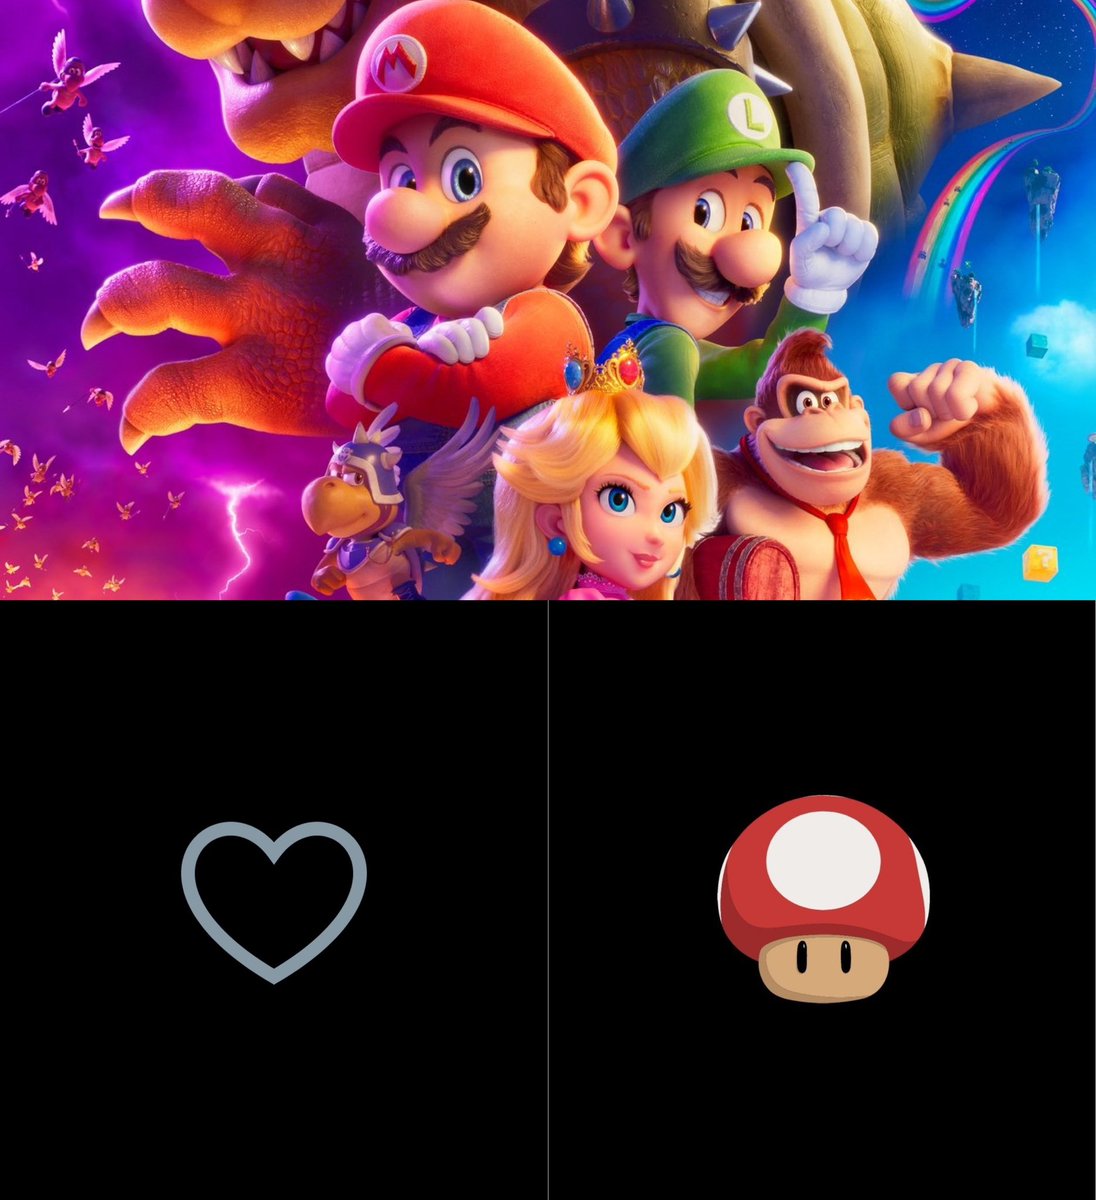 The #SuperMarioMovie hashtag has implemented an animation for the like button.